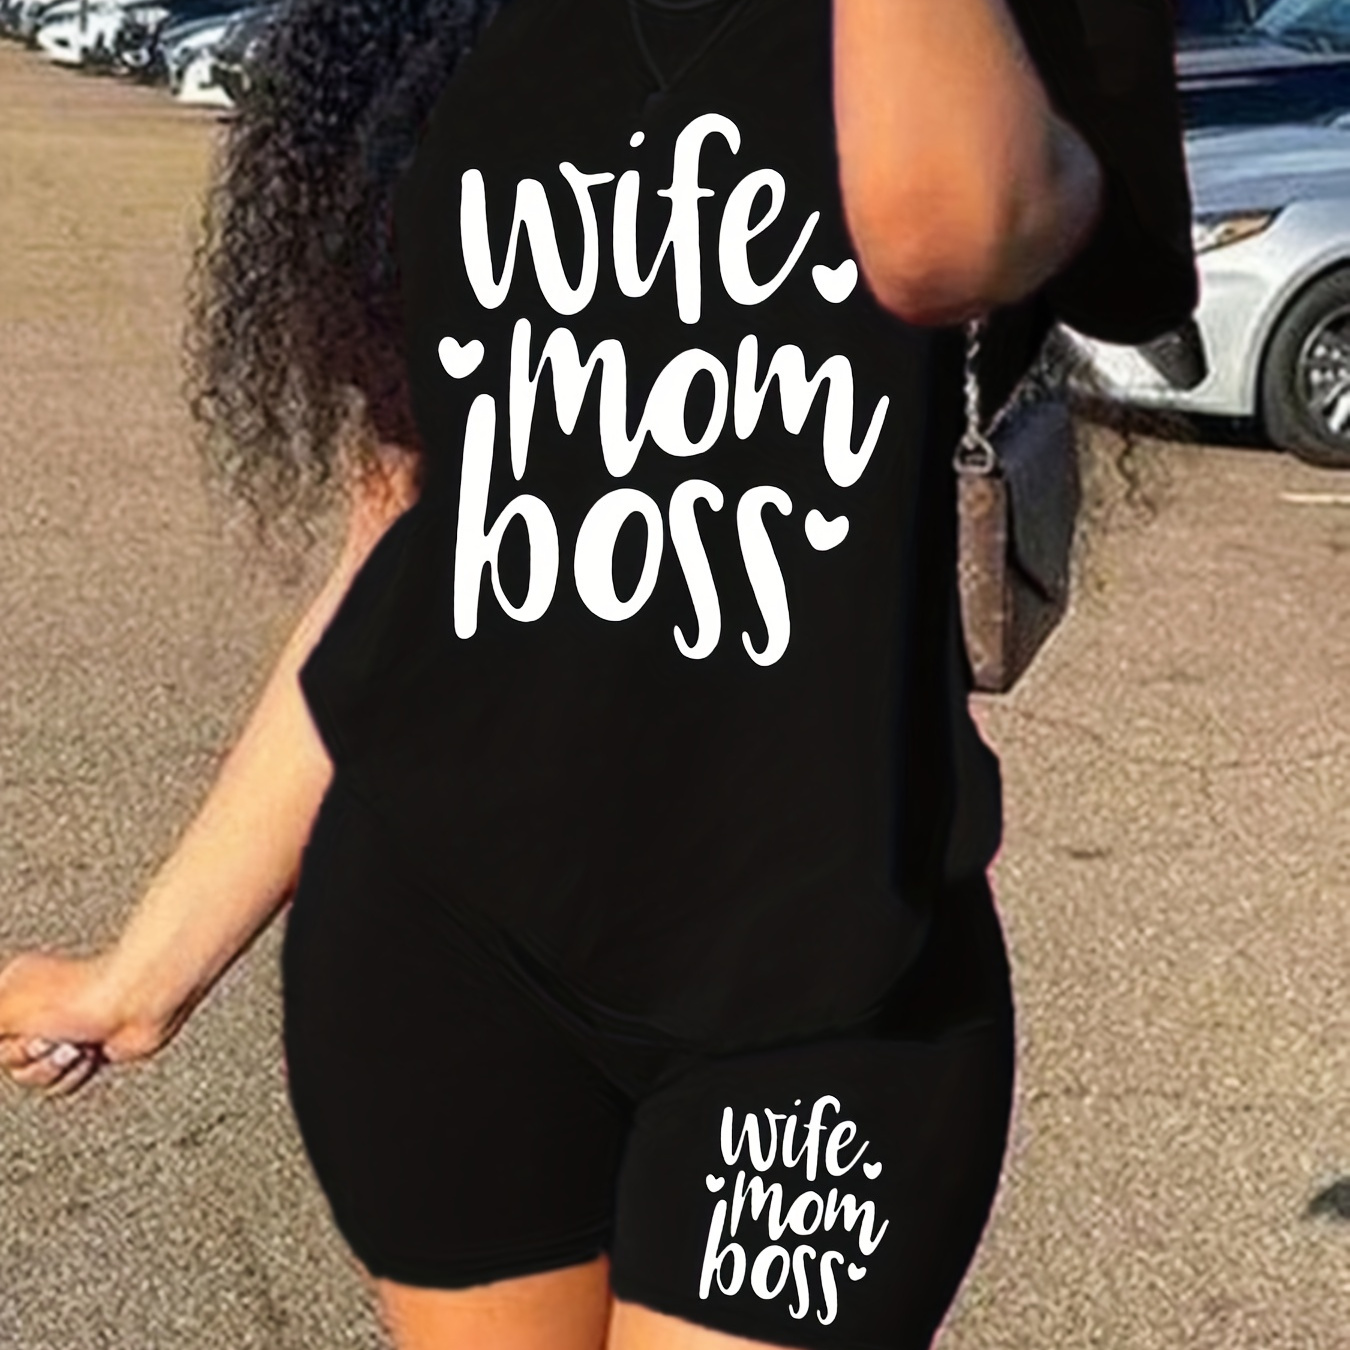 

Wife Mom Boss Print 2 Piece Set, Short Sleeve T-shirt & Biker Shorts, Casual 2pcs Outfit For Summer & Spring, Women's Clothing